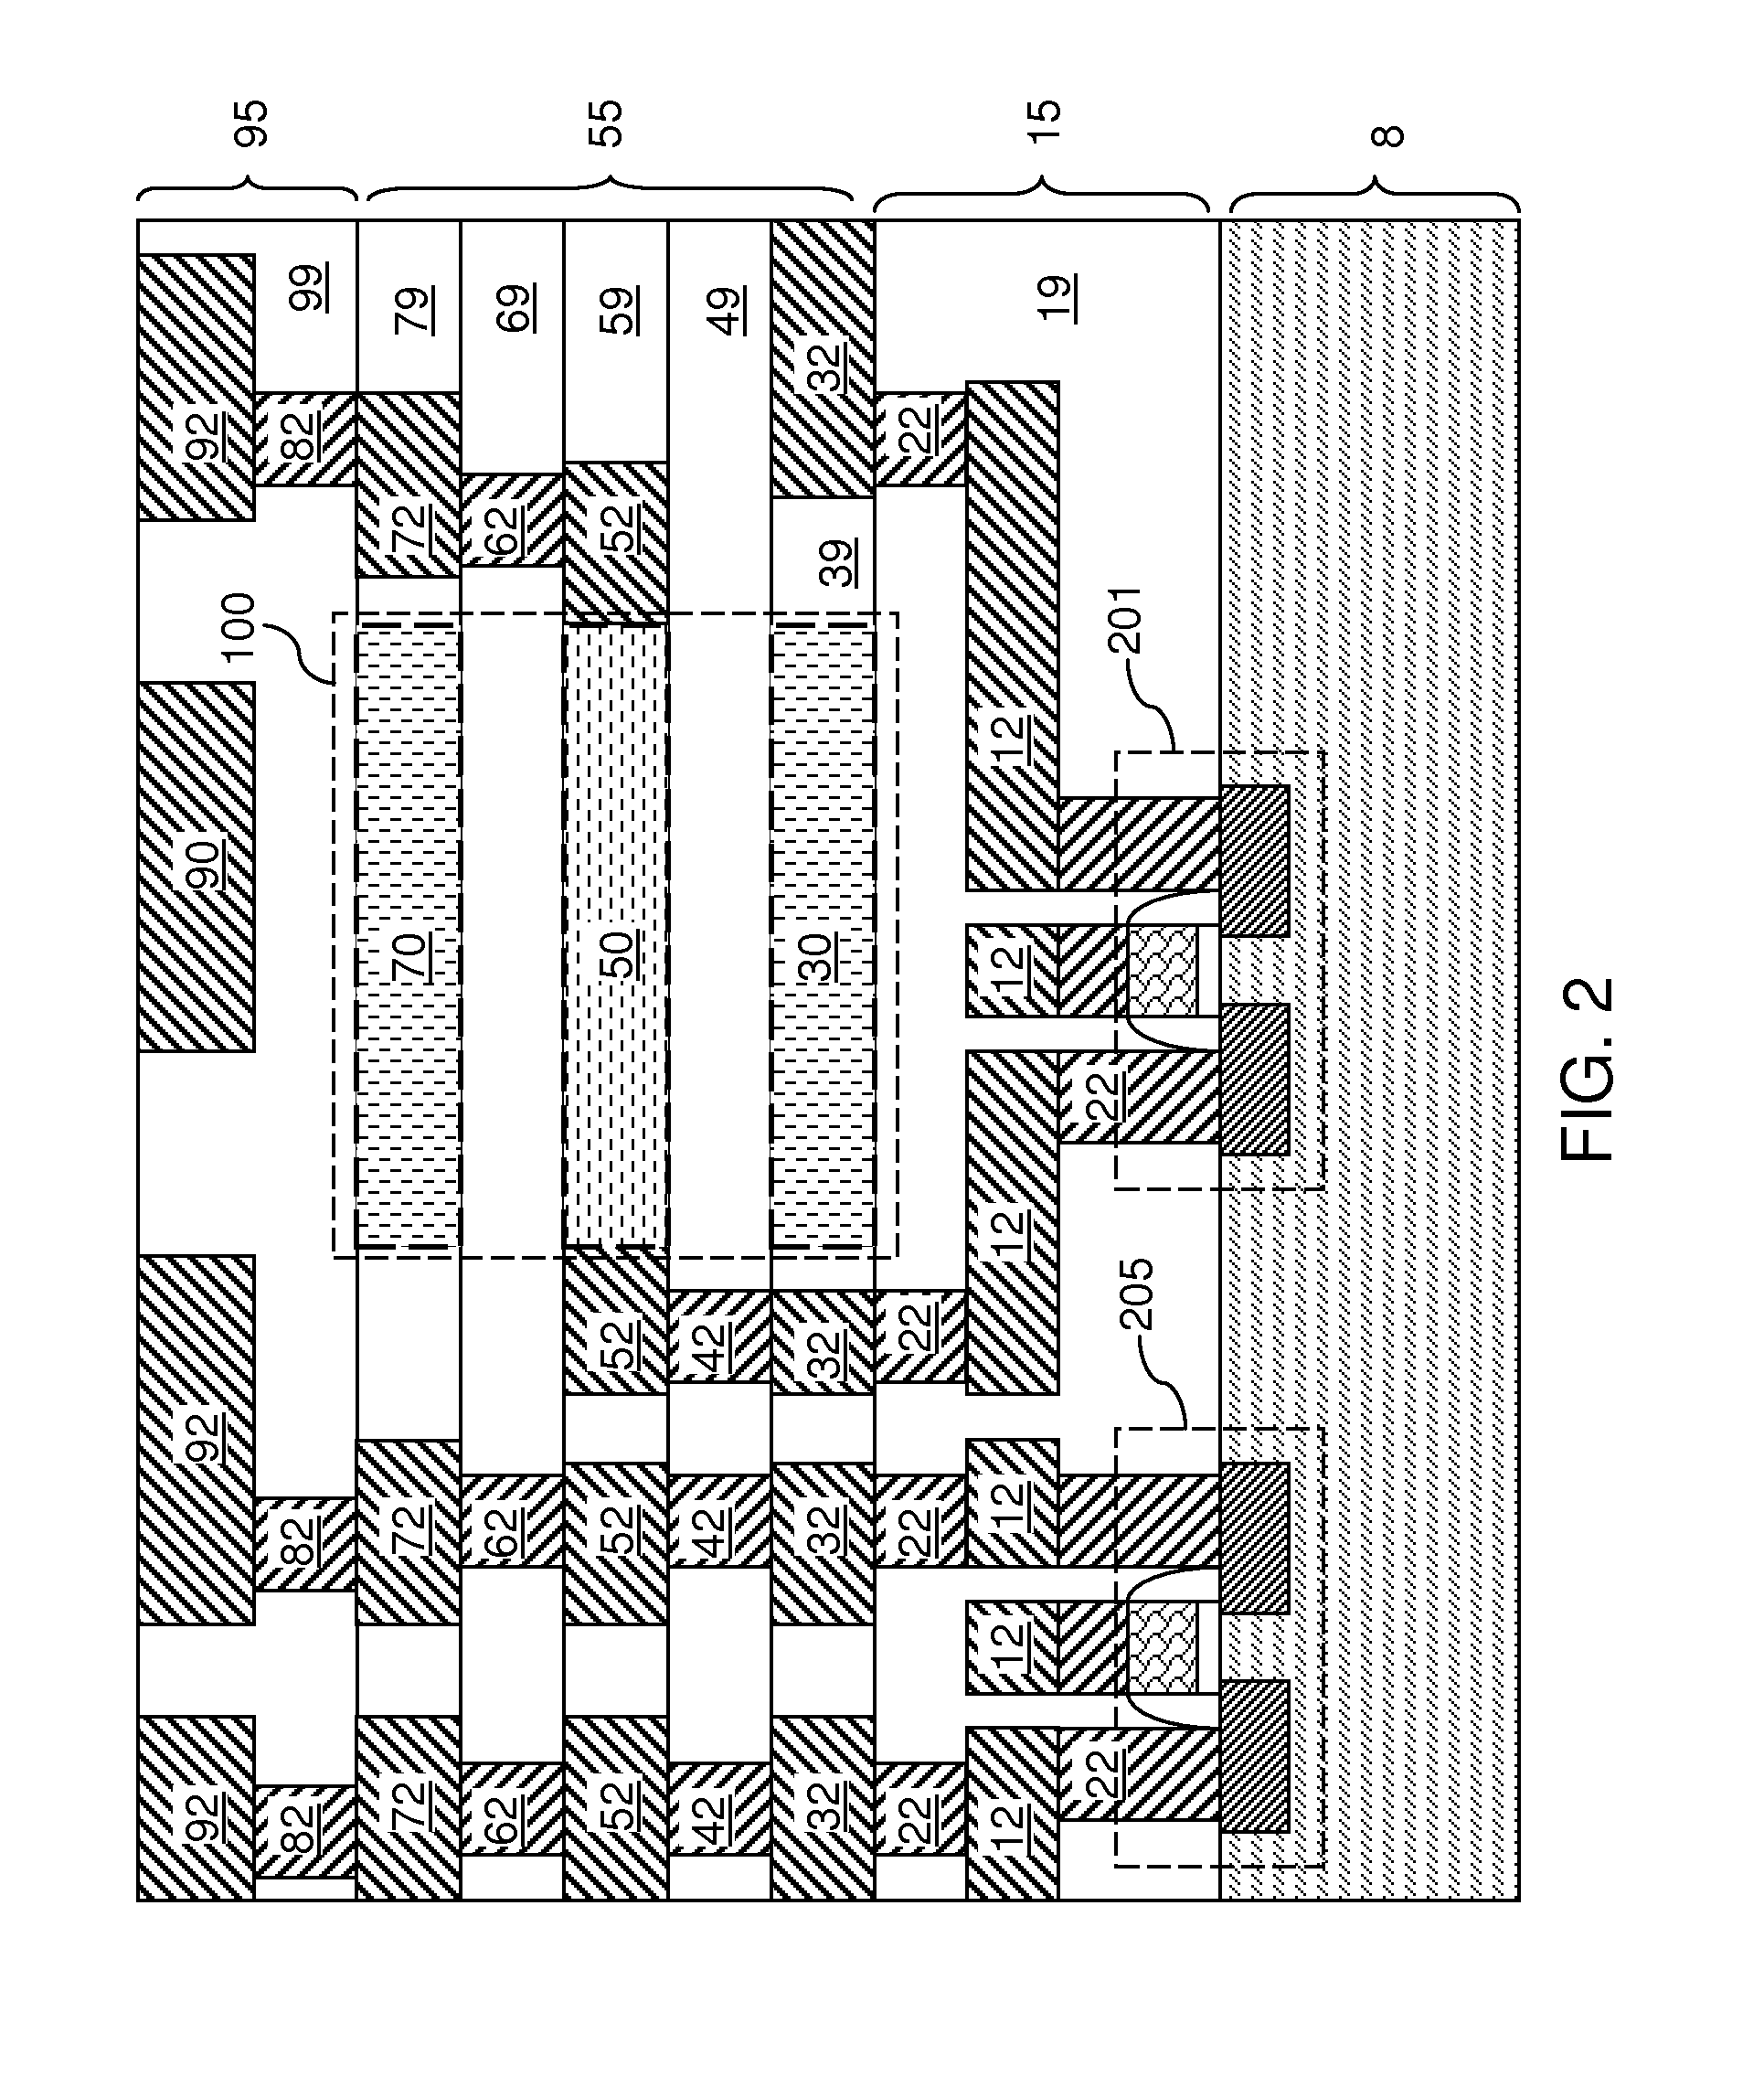 Electrically programmable metal fuse